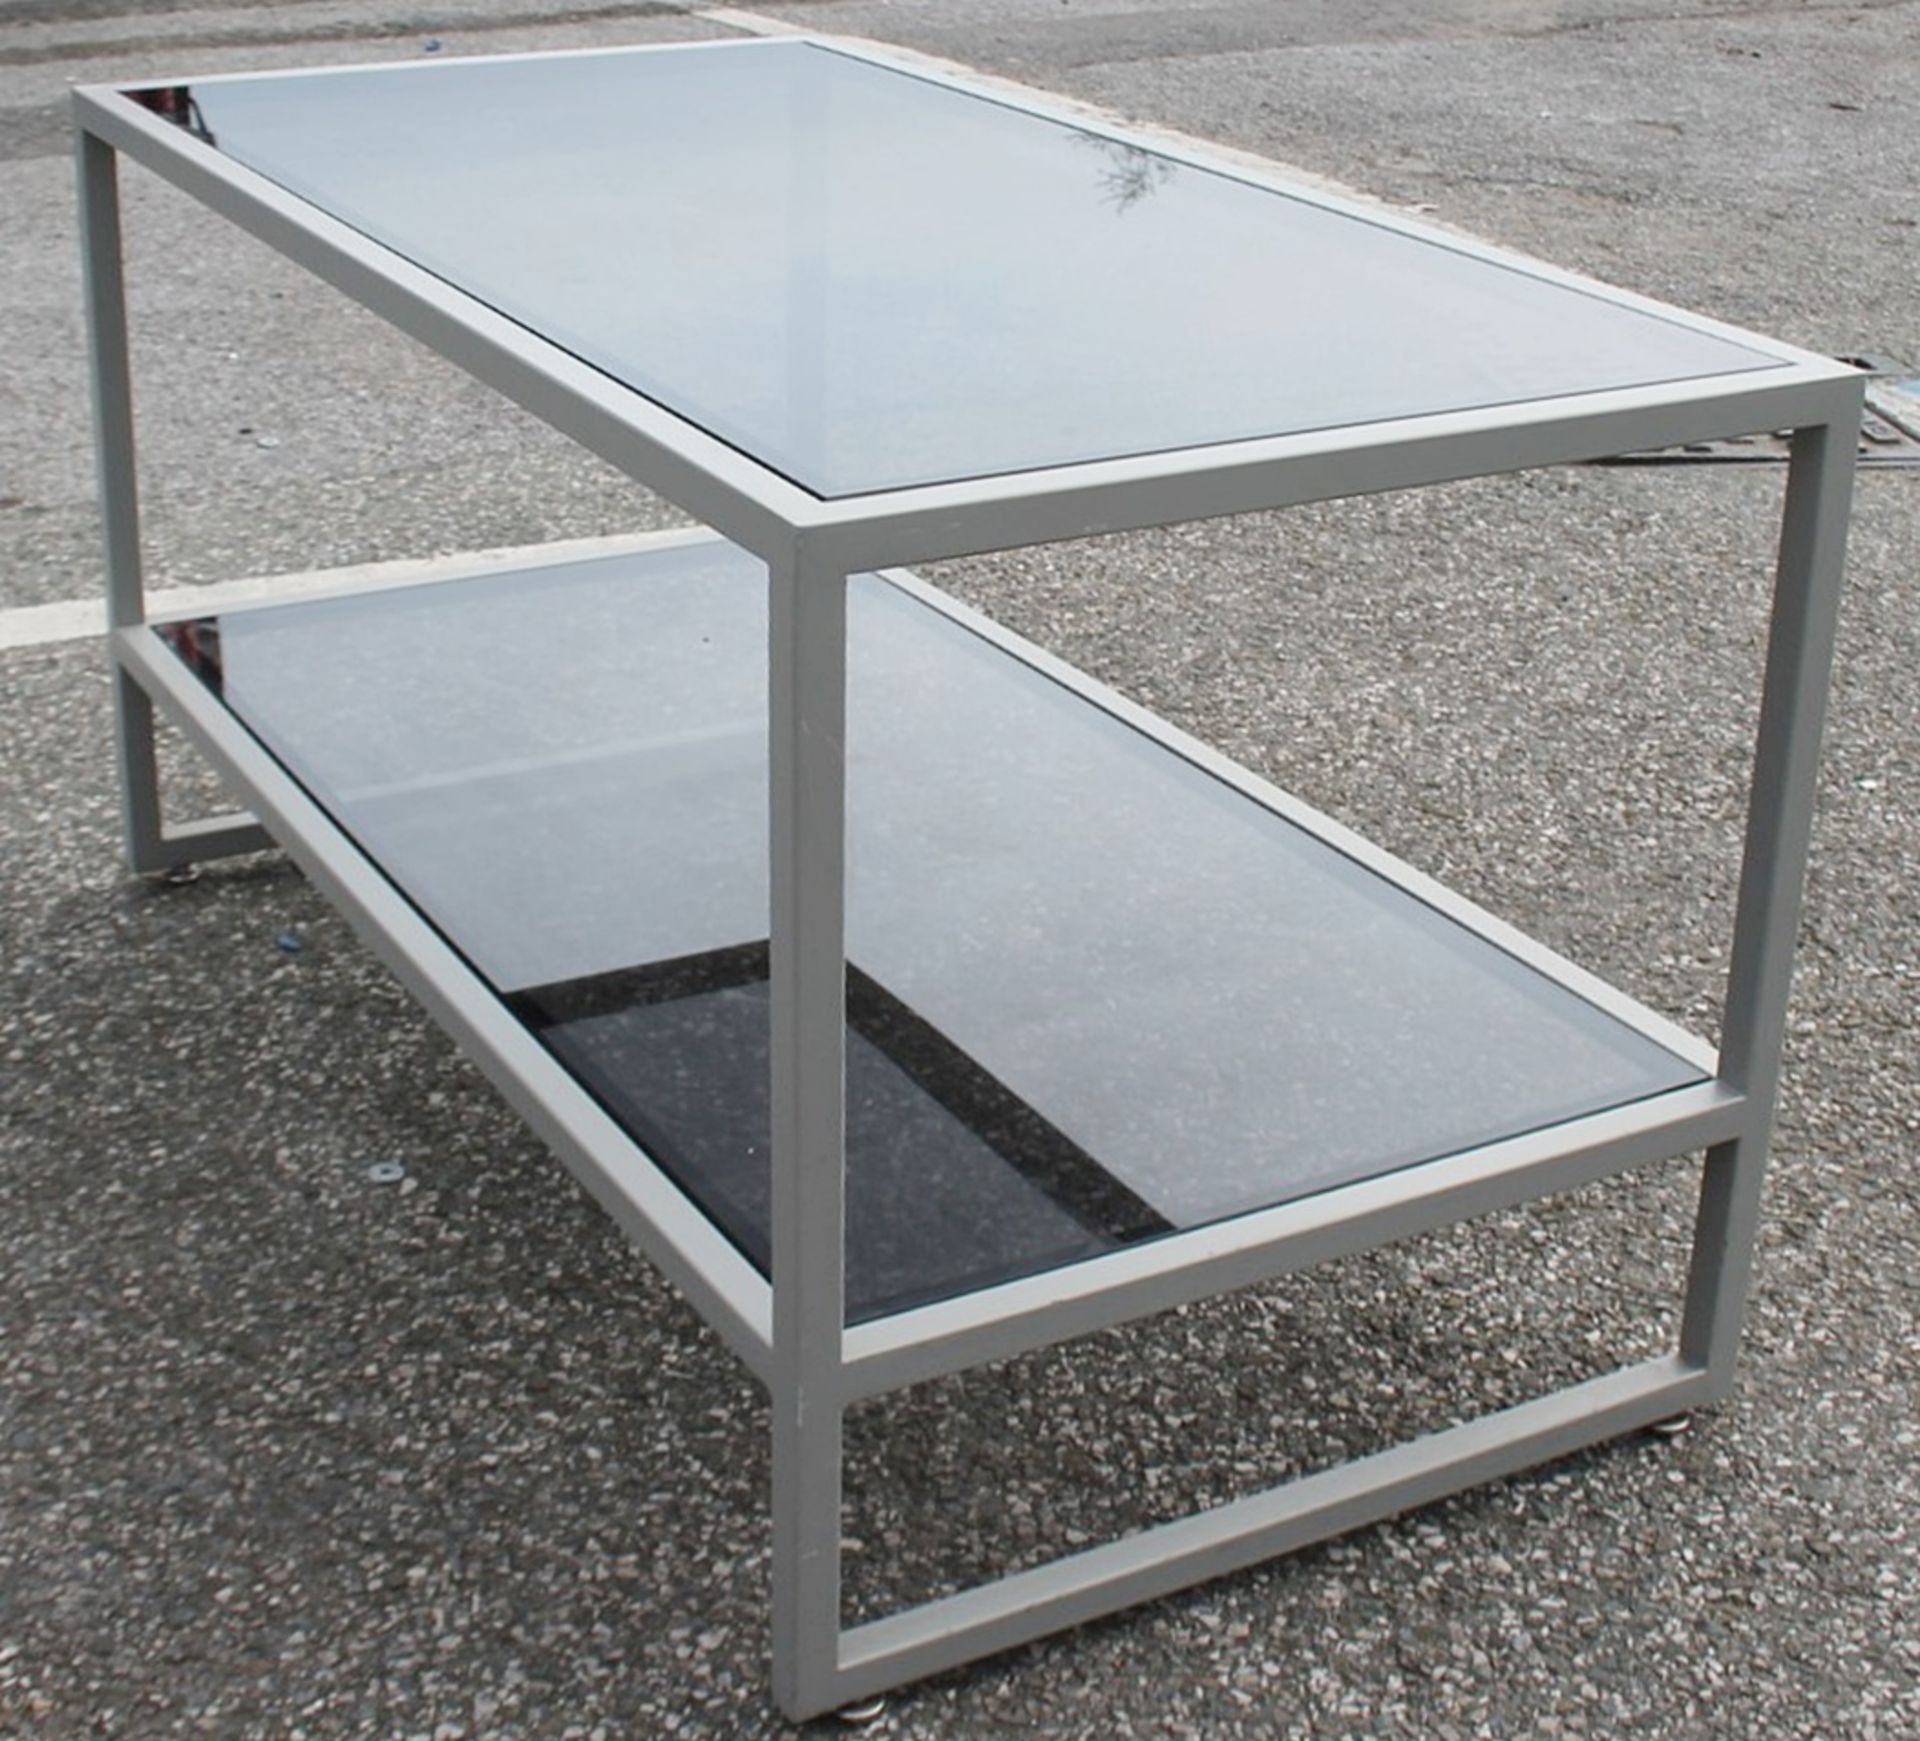 A Pair Of Commercial Display Tables With Tinted Glass Tops And Under-shelves - Image 3 of 3